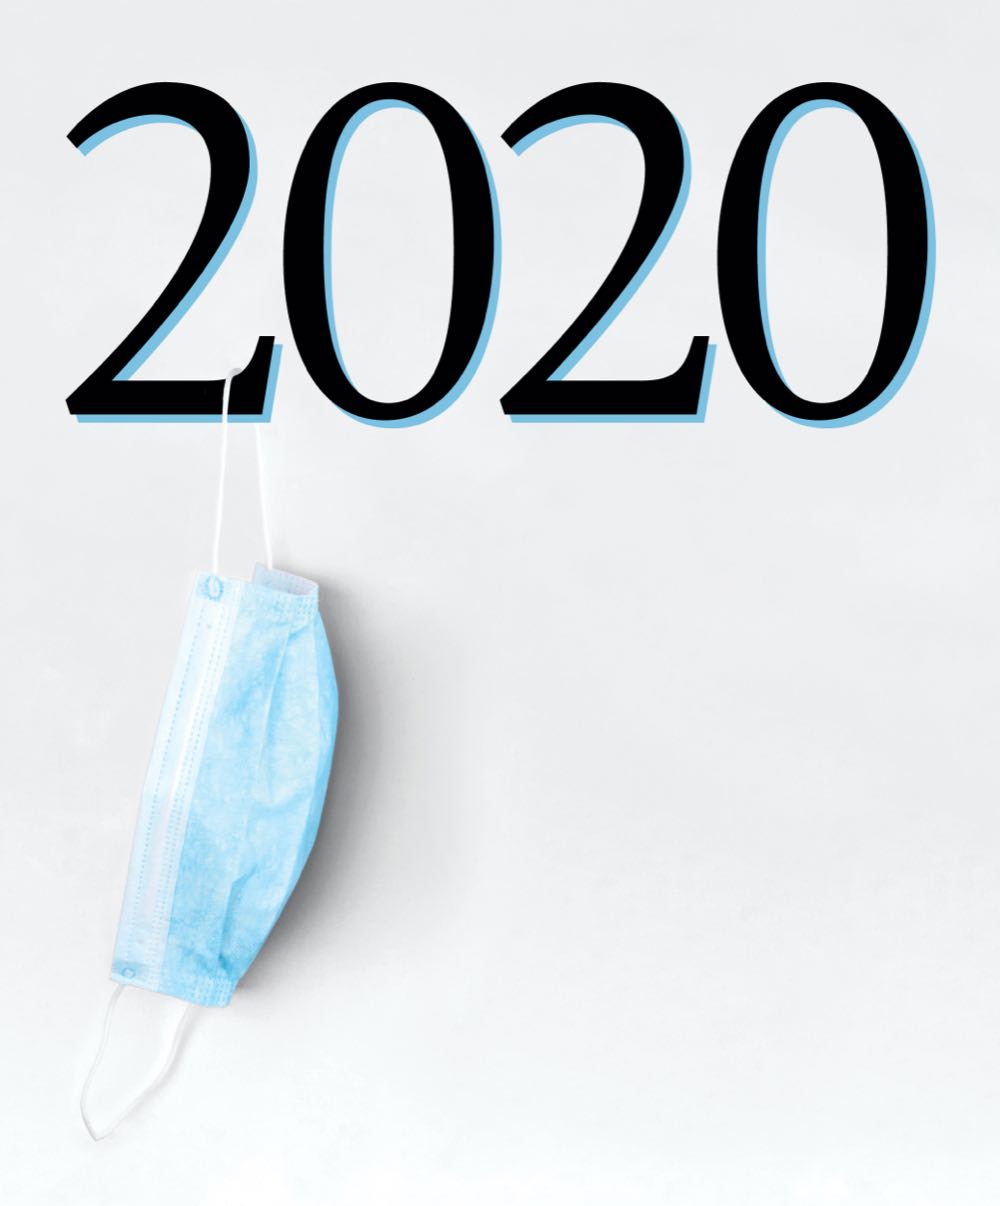 A mask hanging off of the numbers 2020